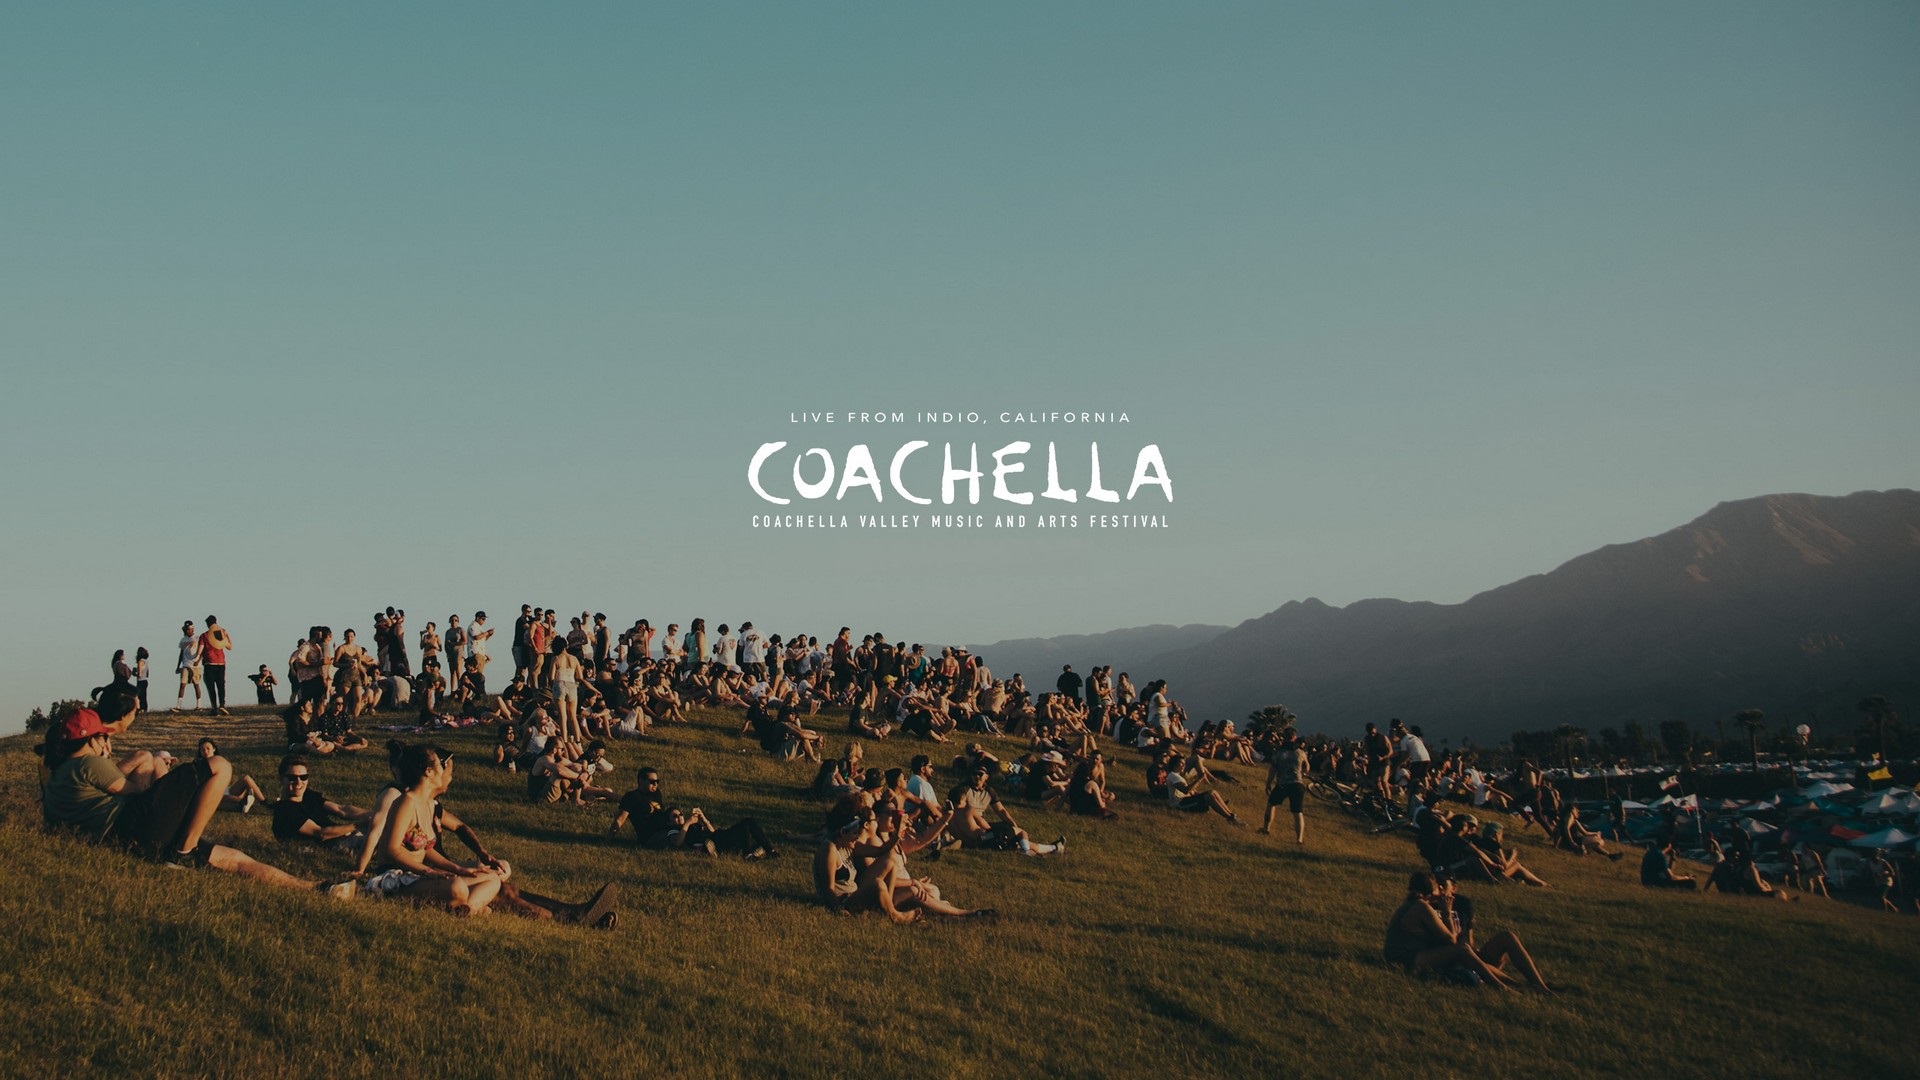 Computer Wallpapers Coachella 2019 With high-resolution 1920X1080 pixel. You can use this wallpaper for your Windows and Mac OS computers as well as your Android and iPhone smartphones